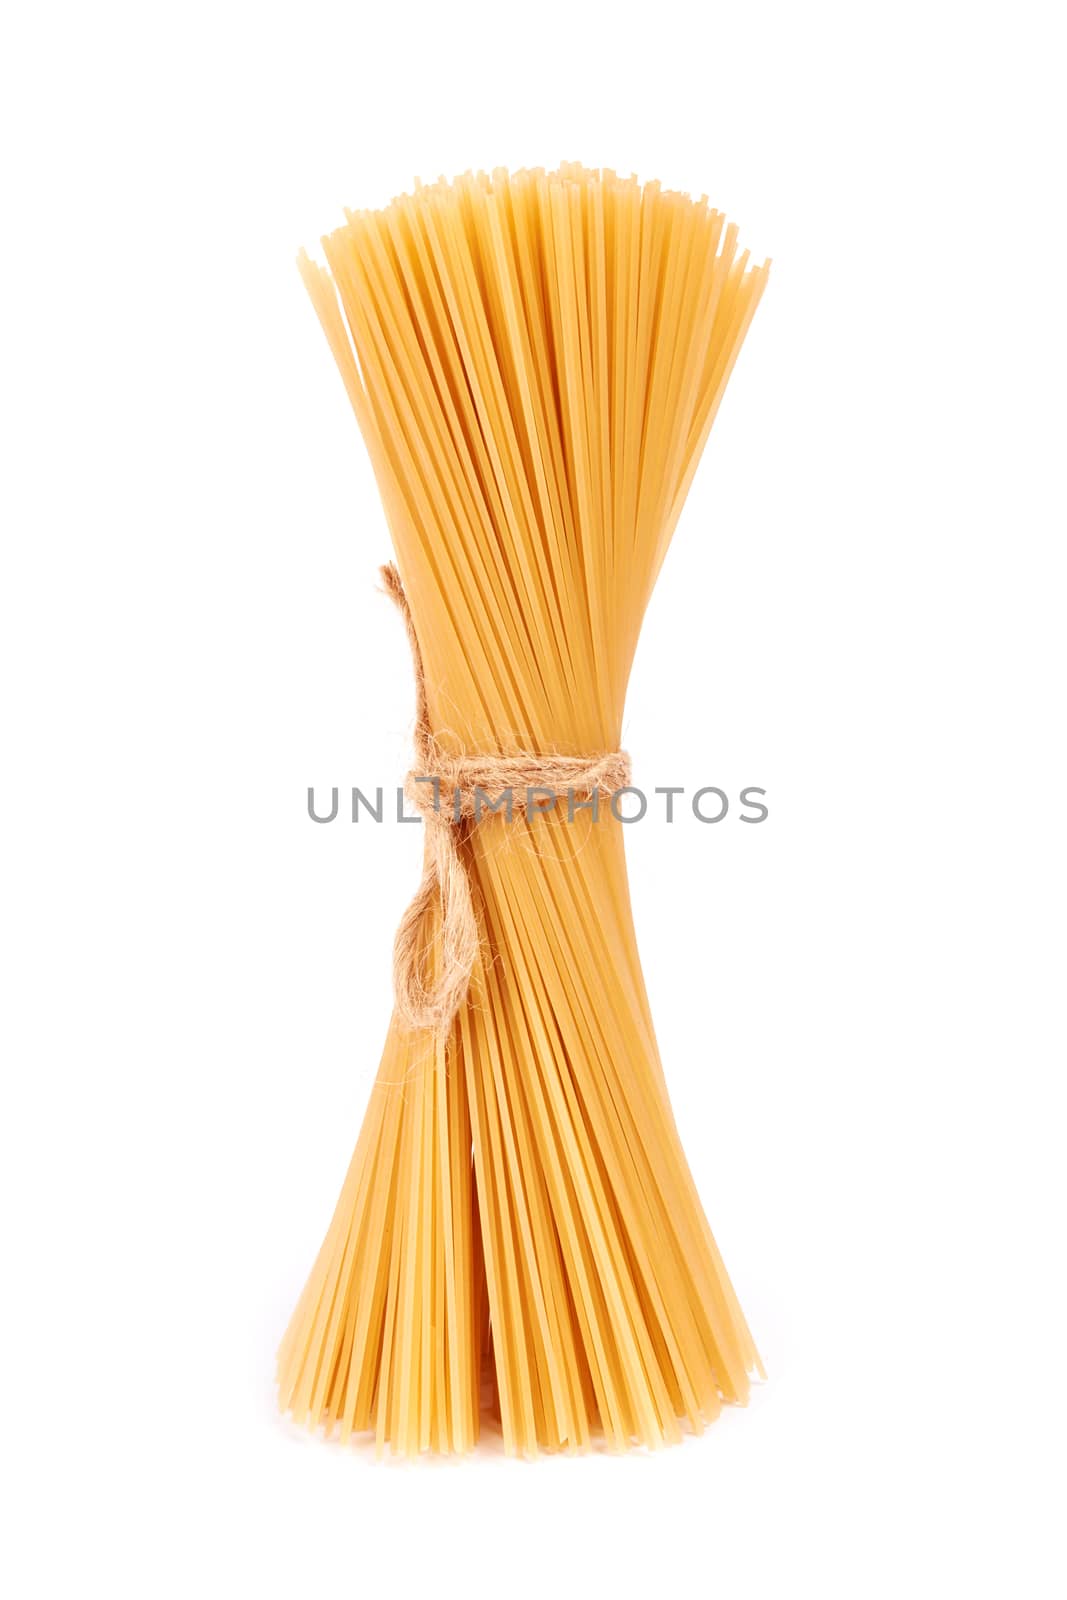 raw spaghetti isolated on a white background